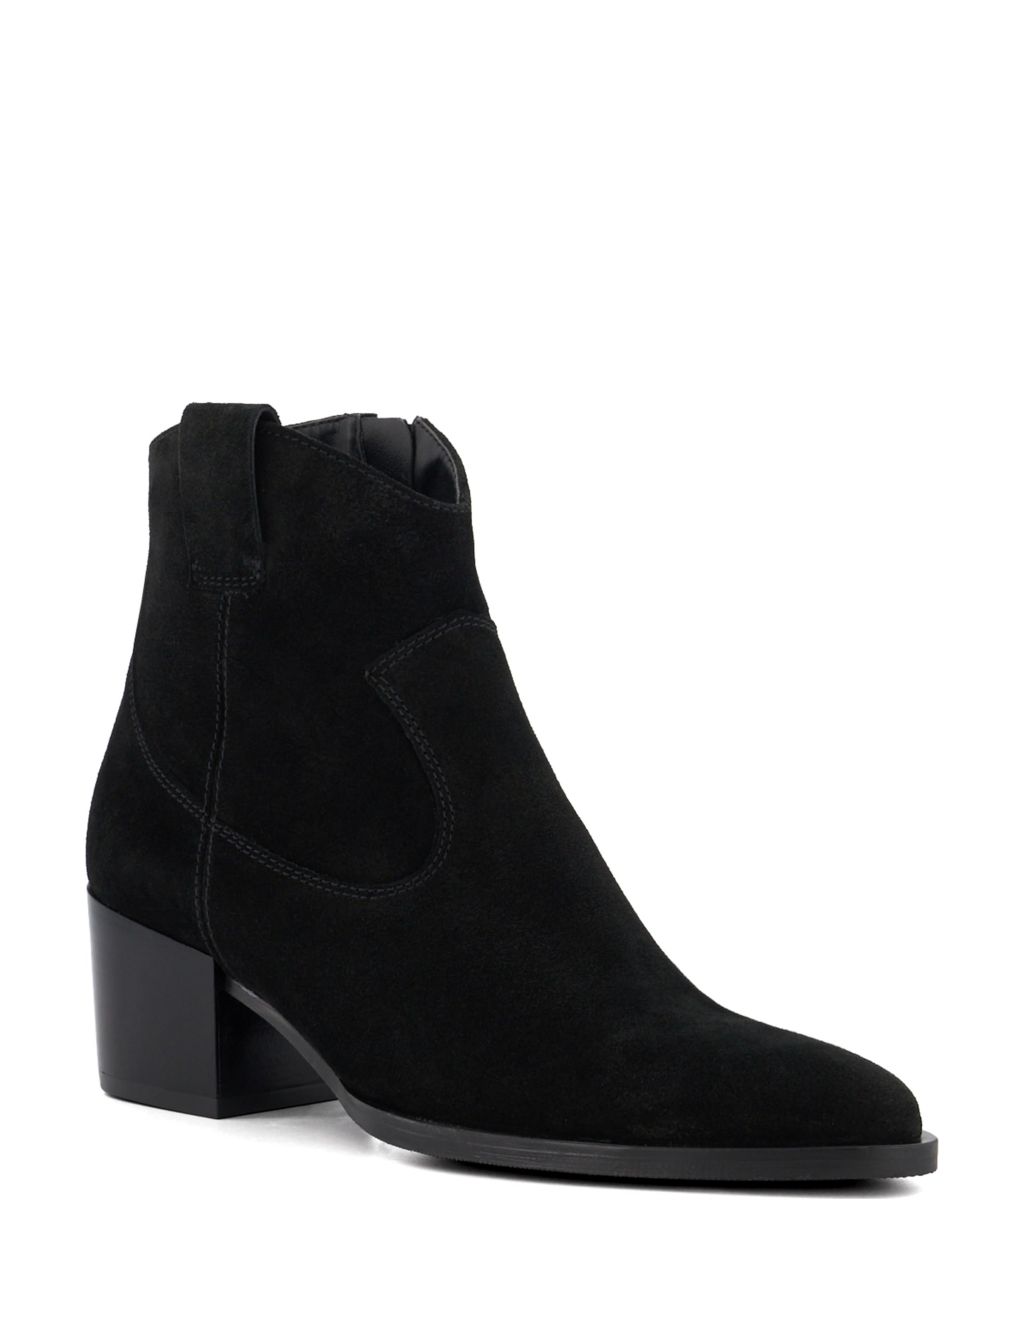 Suede Cow Boy Block Heel Ankle Boots image 2